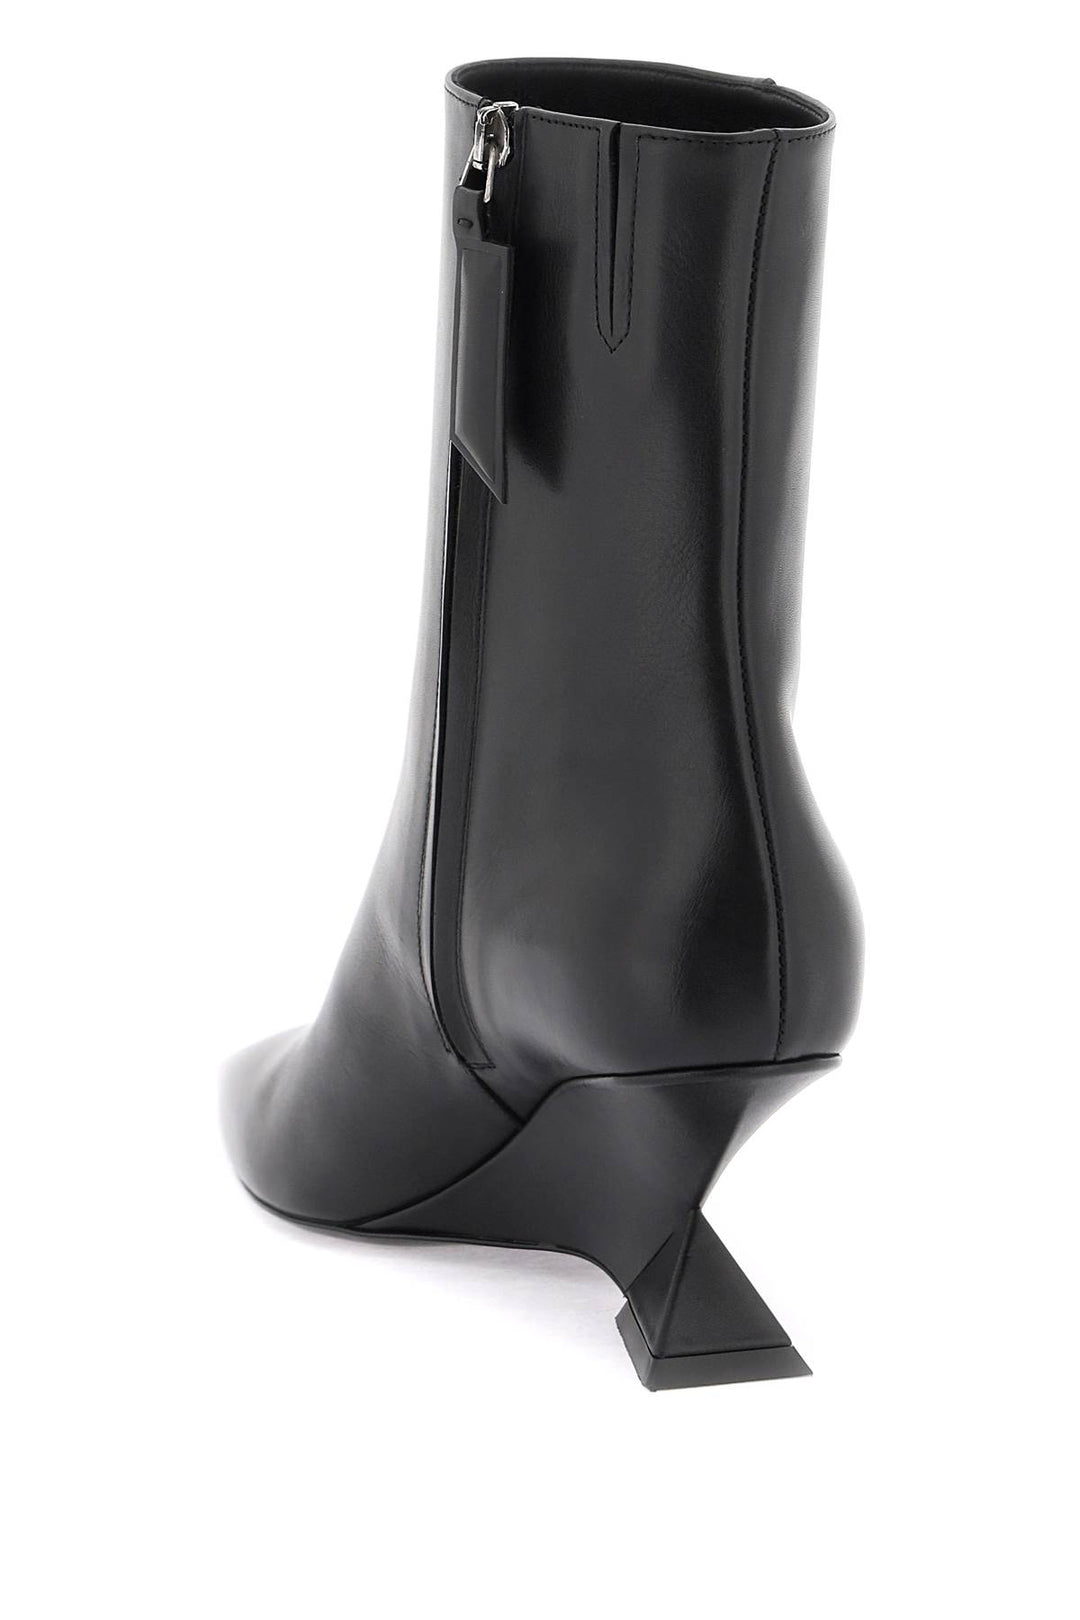 The Attico 'Cheope' Ankle Boots   Black